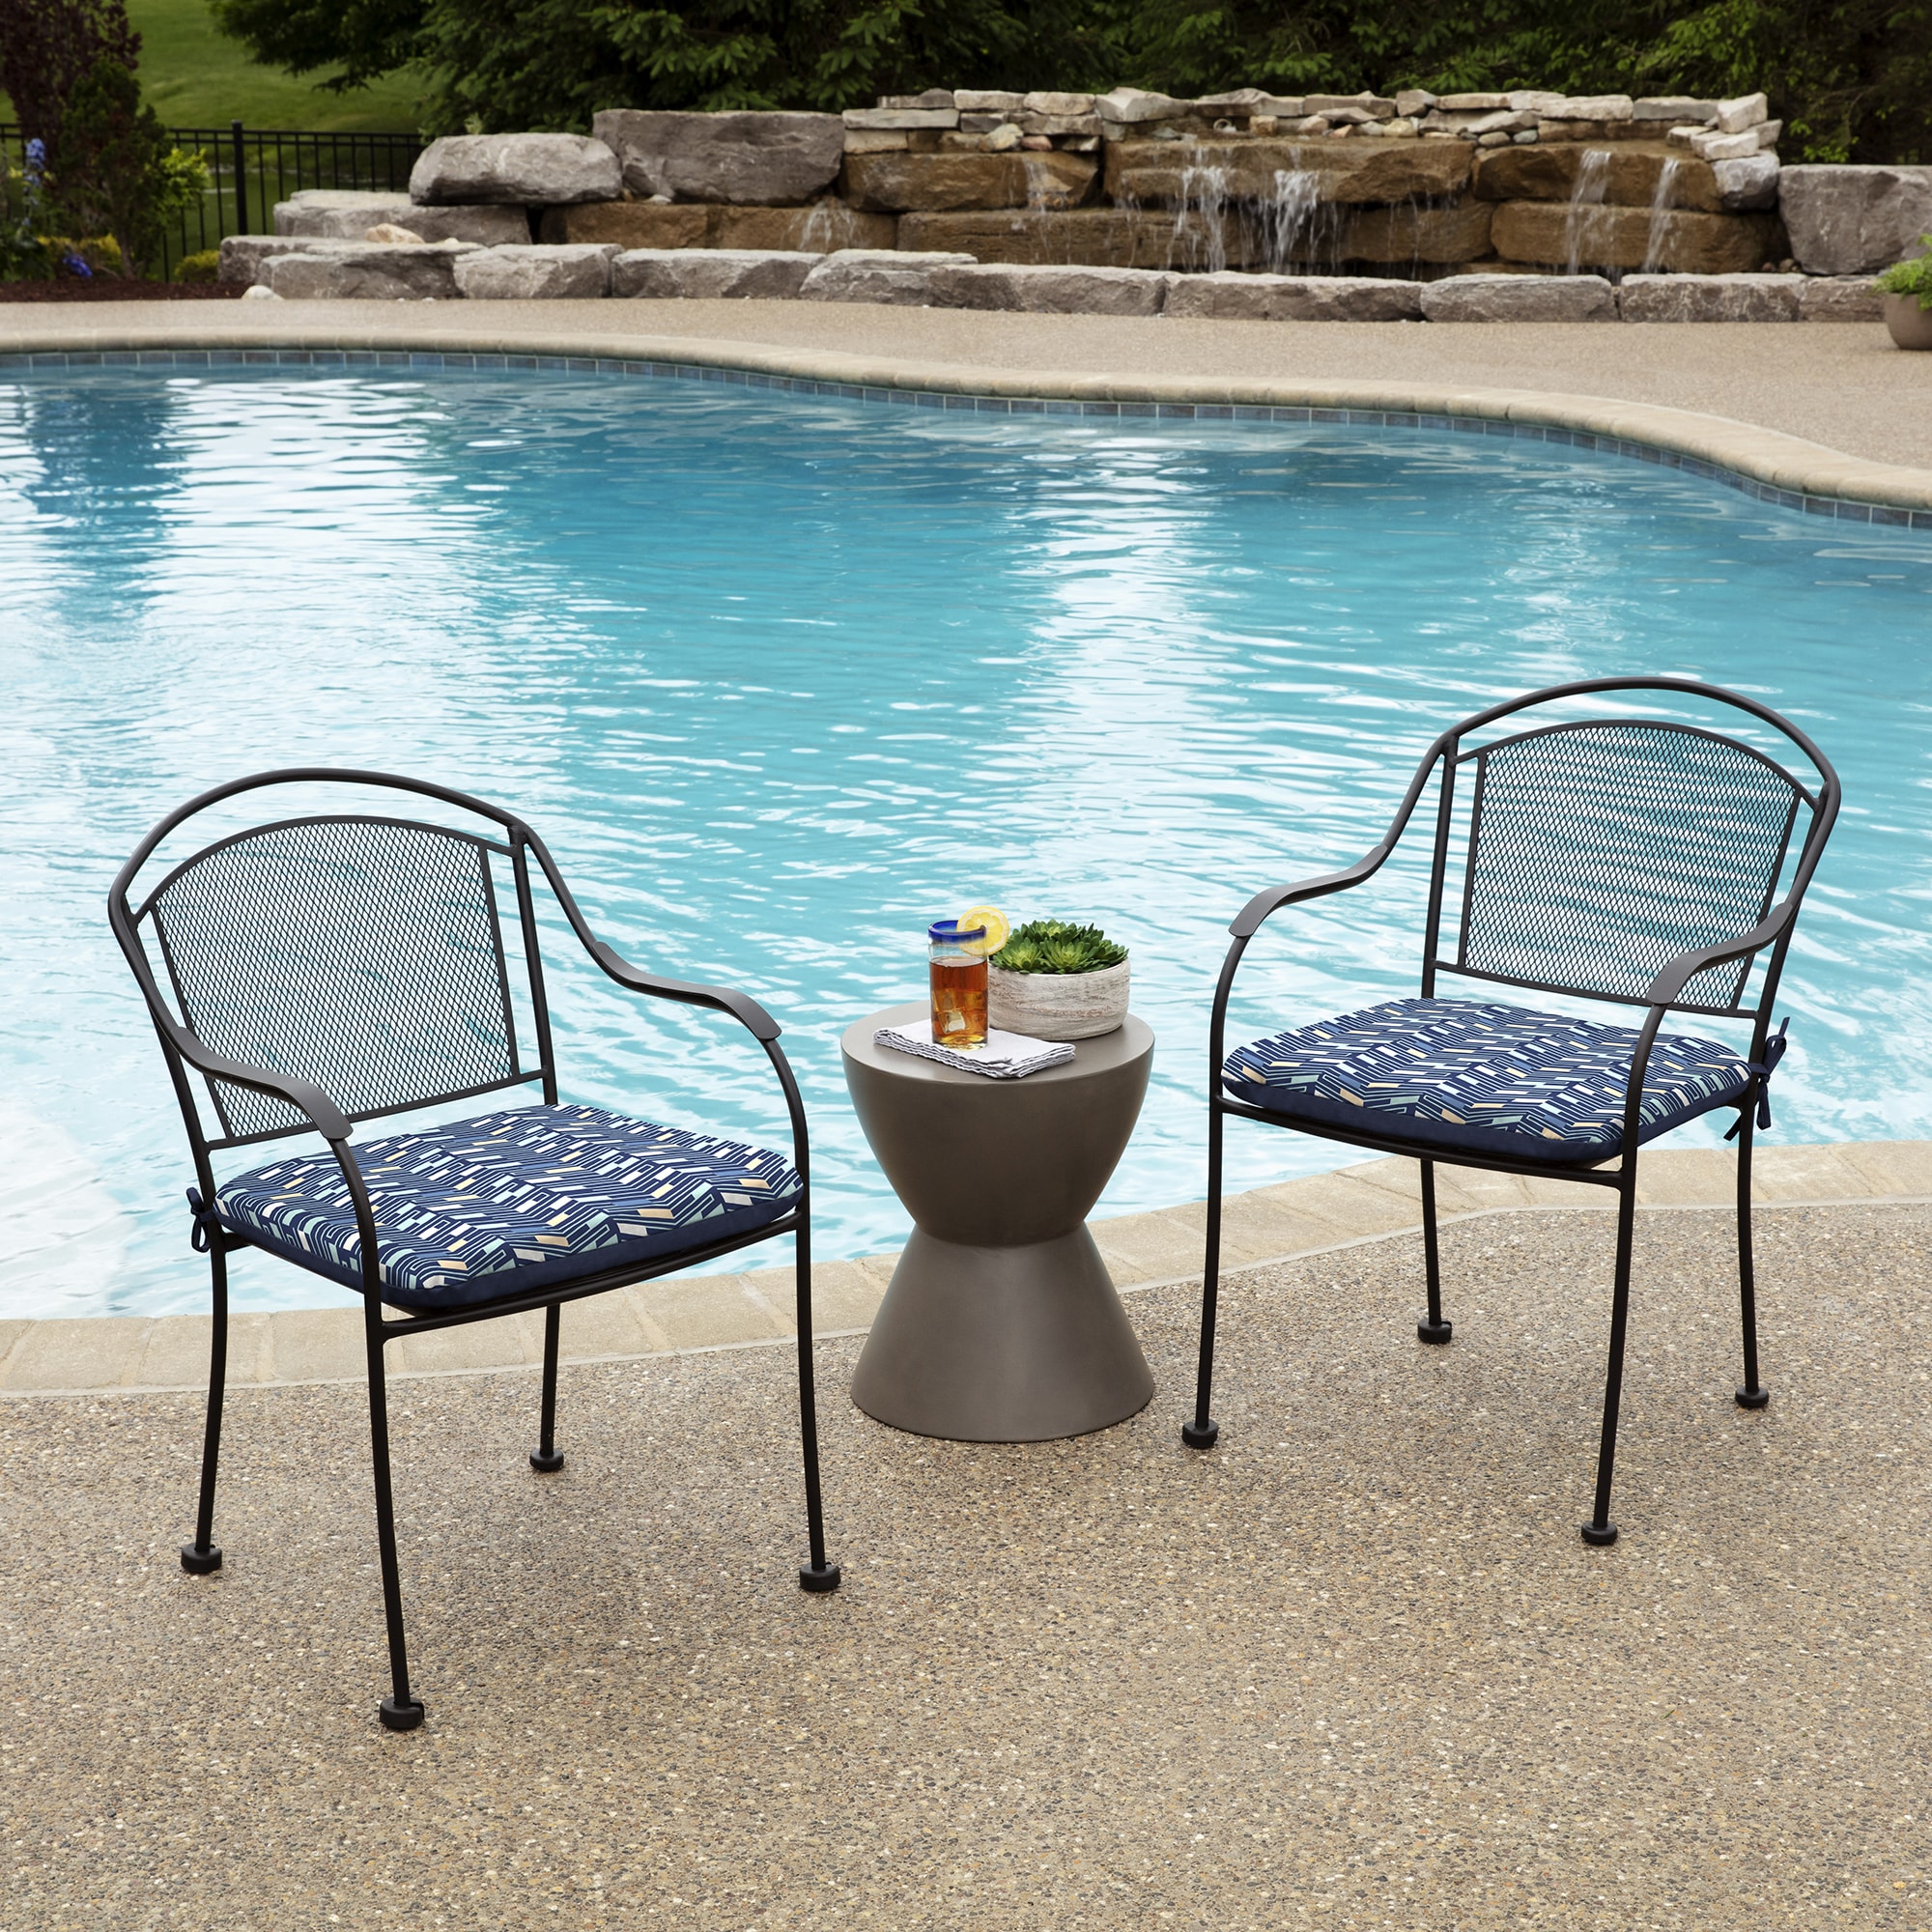 Classic Accessories Water-Resistant 19 x 19 x 5 Inch Square Patio